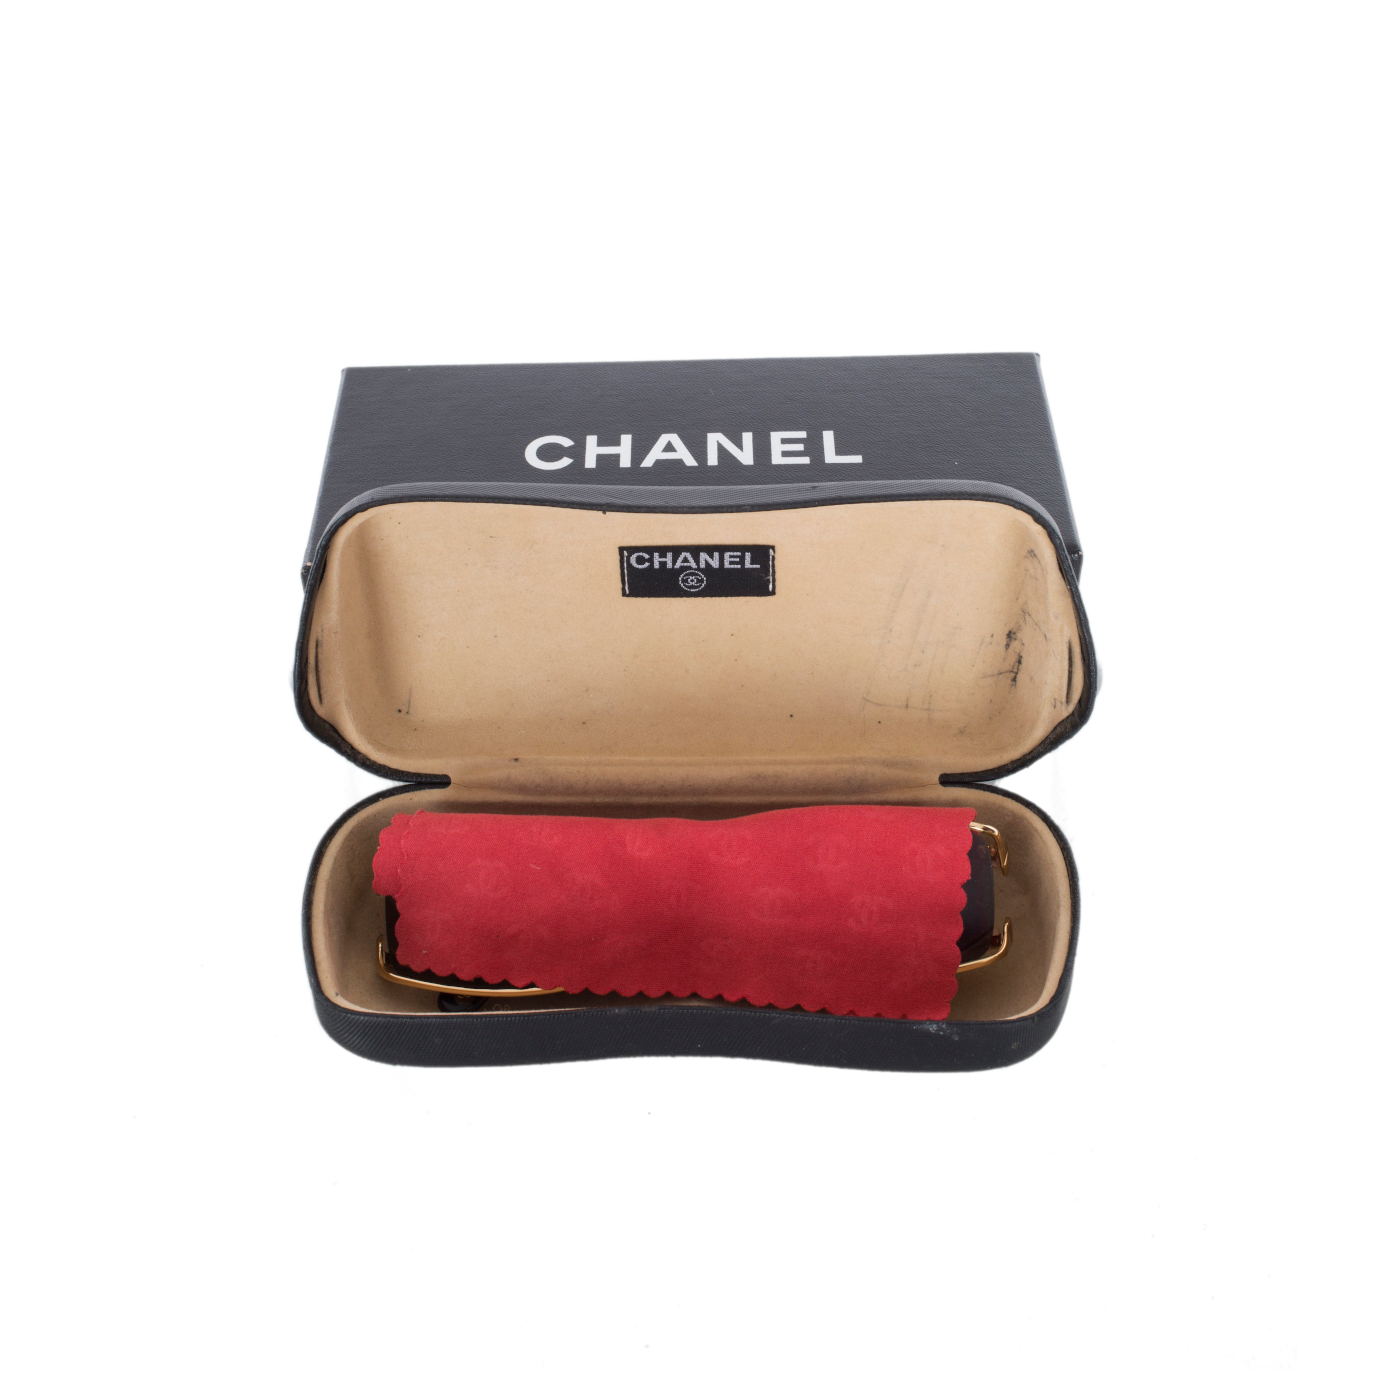 CHANEL Makeup Vintage New Cosmetic Bag 7 x 4.5 Inches Red Velvet & Box VERY  RARE